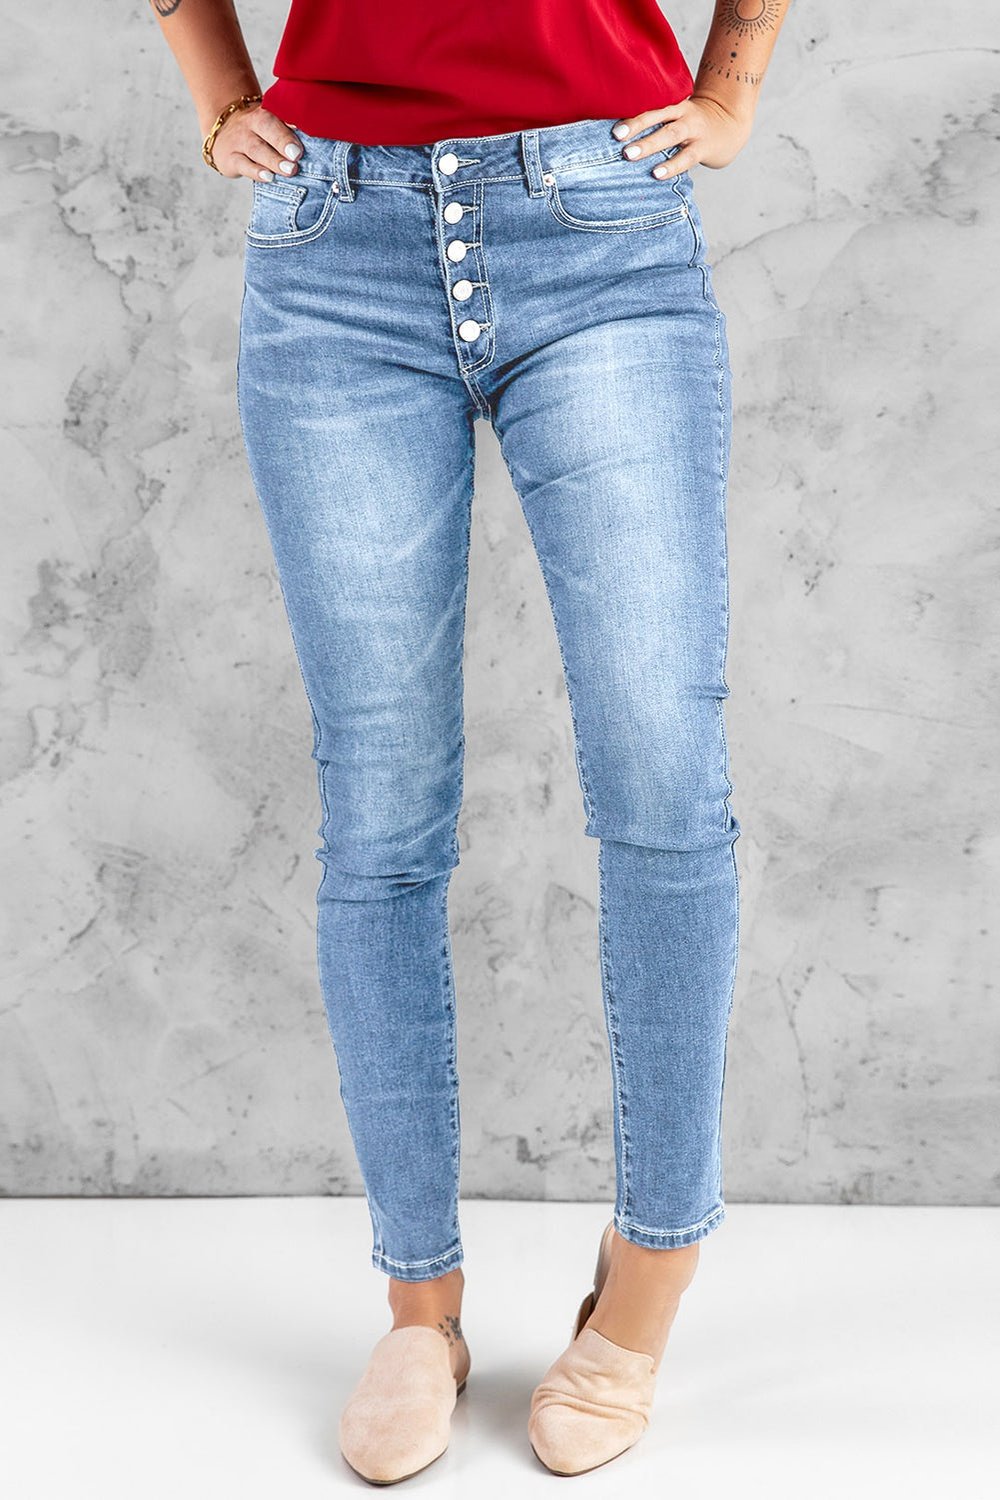 What You Want Button Fly Pocket Jeans - Jeans - FITGGINS